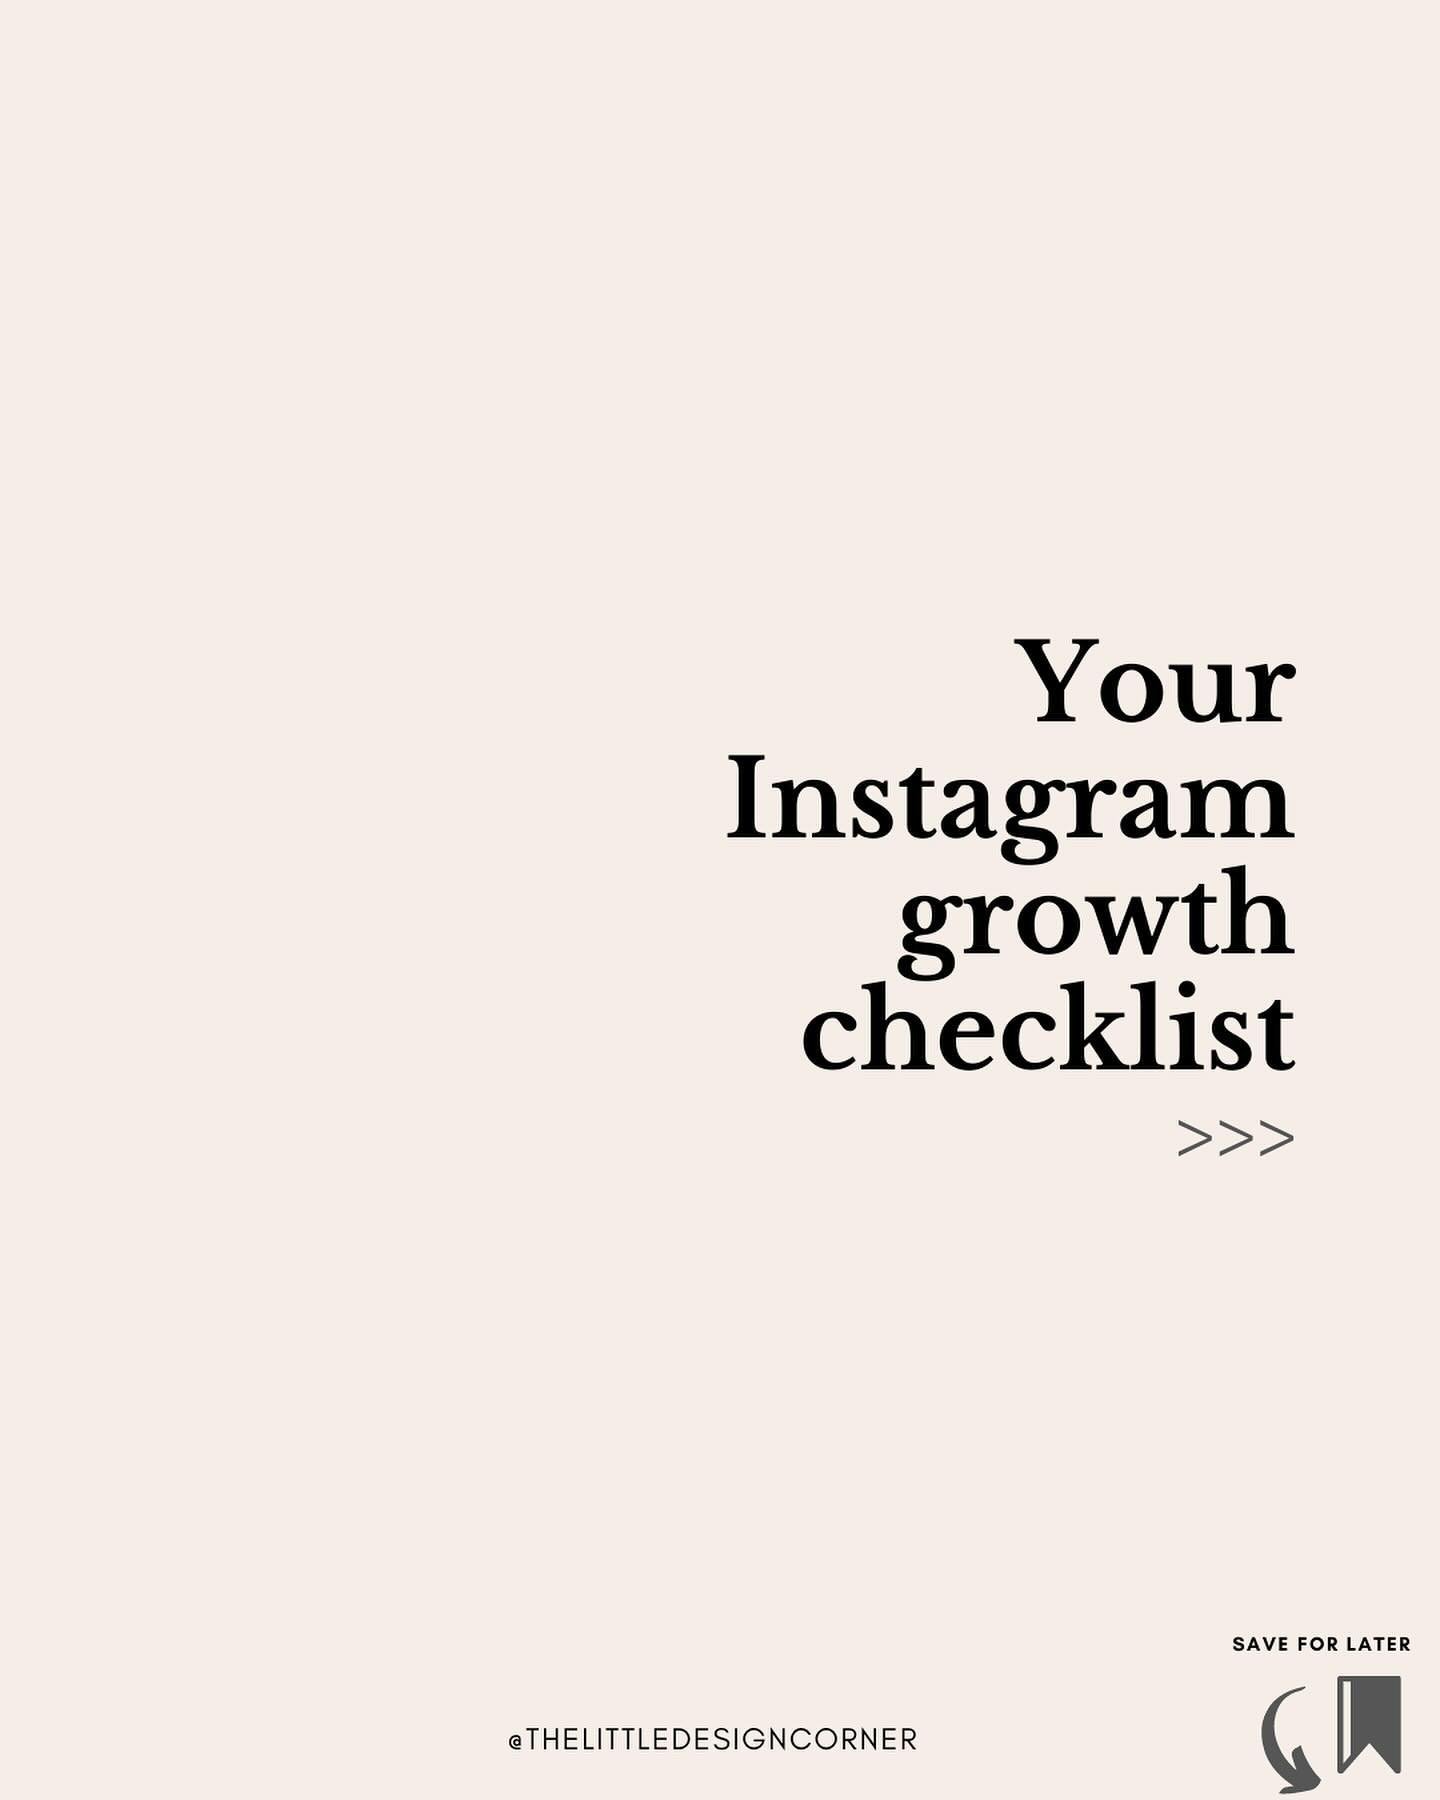 Here&rsquo;s your daily checklist for Instagram growth. 📈

Time required: 45 minutes per day

Daily tasks list:

✅ 15 MINS: Post to your feed (choose the content you enjoy creating and until you see good growth vary what you create - e.g. image, car